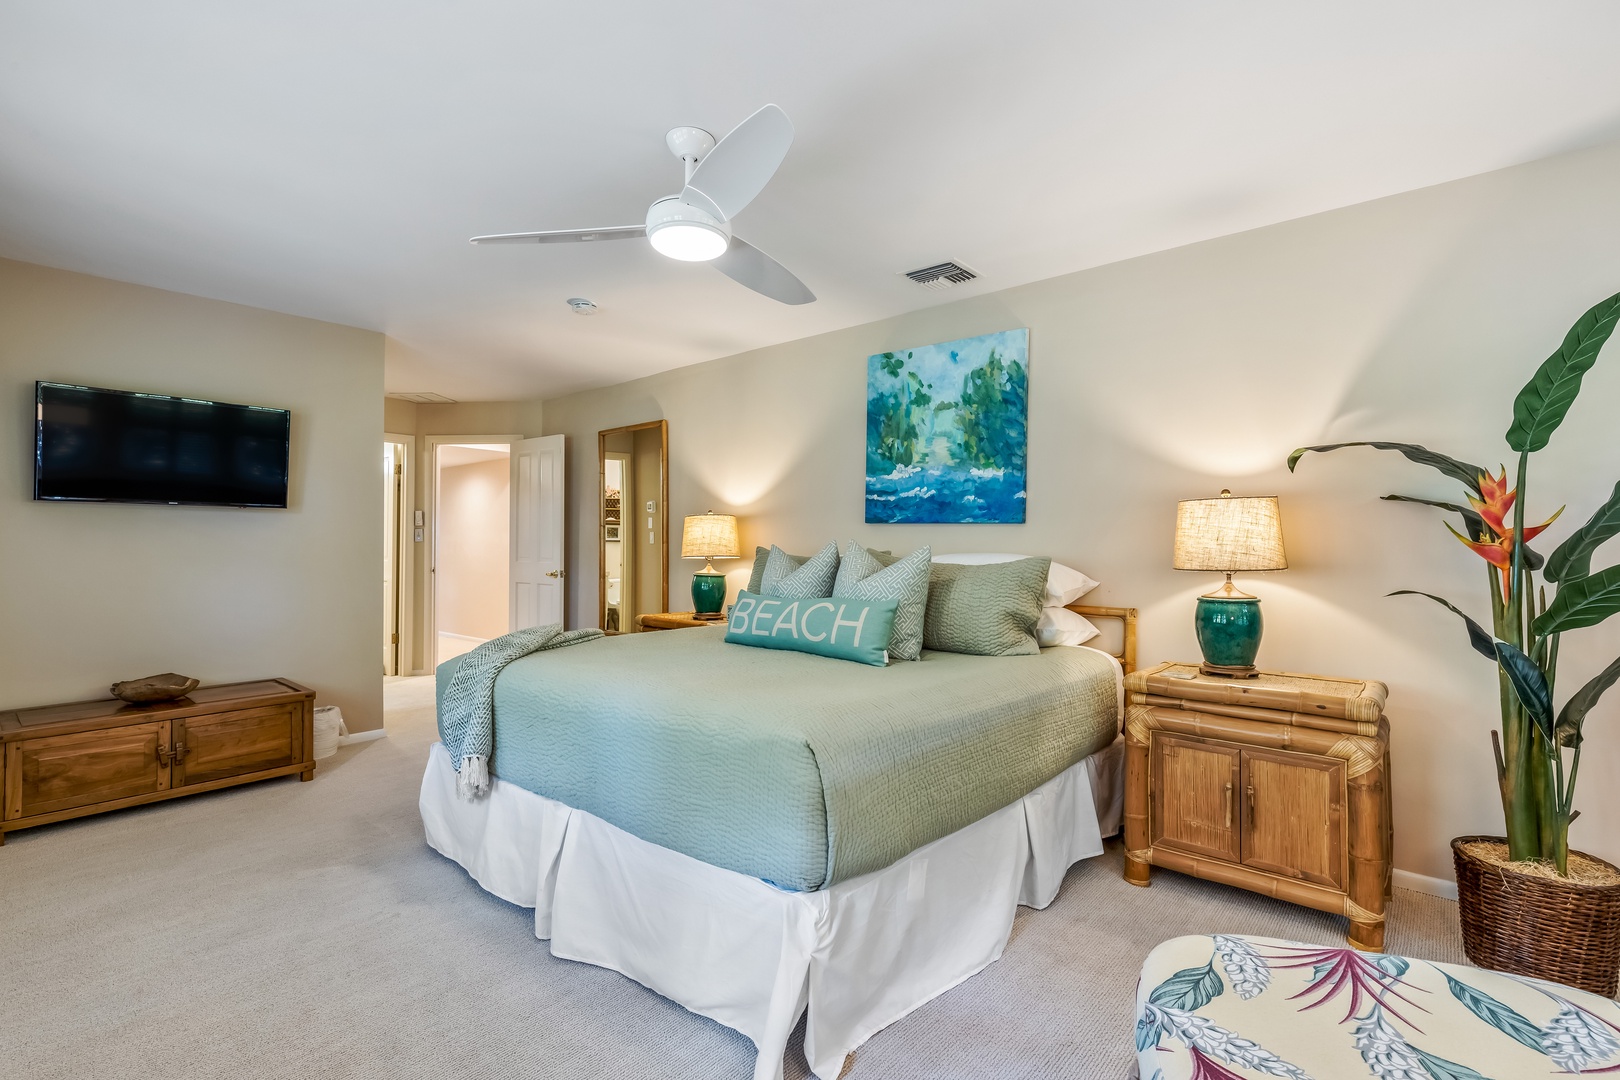 Honolulu Vacation Rentals, Hale Ola - Guest bedroom 4 offers a king bed and ensuite